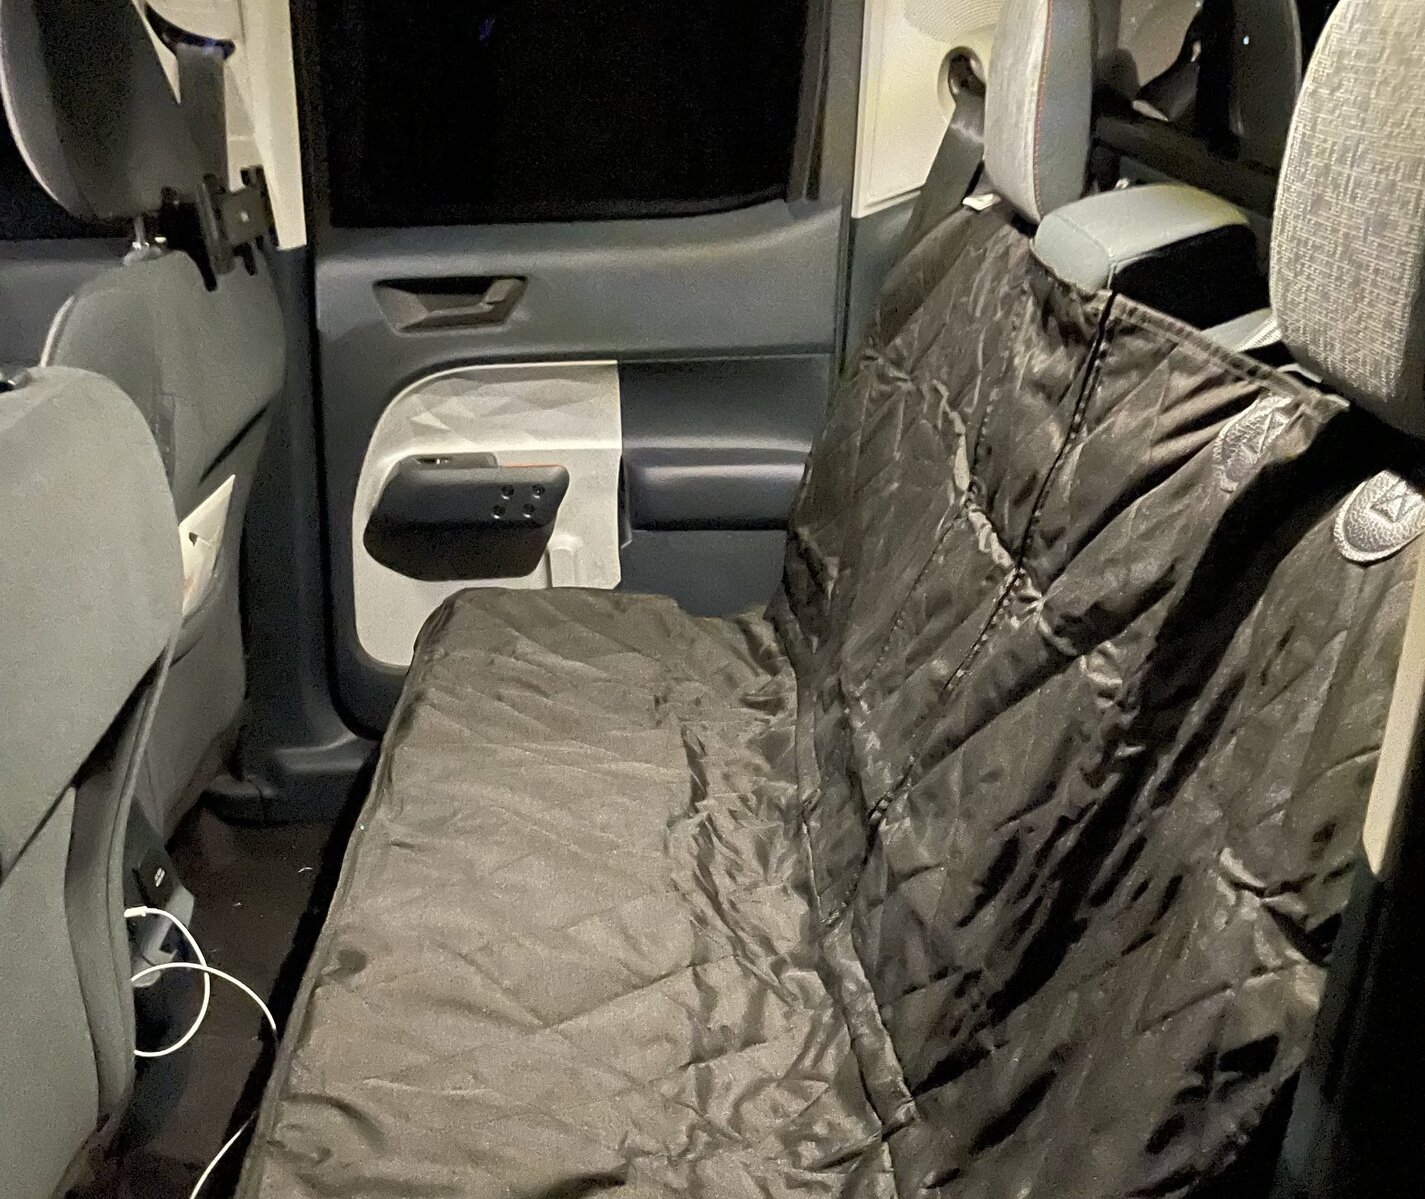 Backseat extender for dogs?  MaverickTruckClub - 2022+ Ford Maverick  Pickup Forum, News, Owners, Discussions